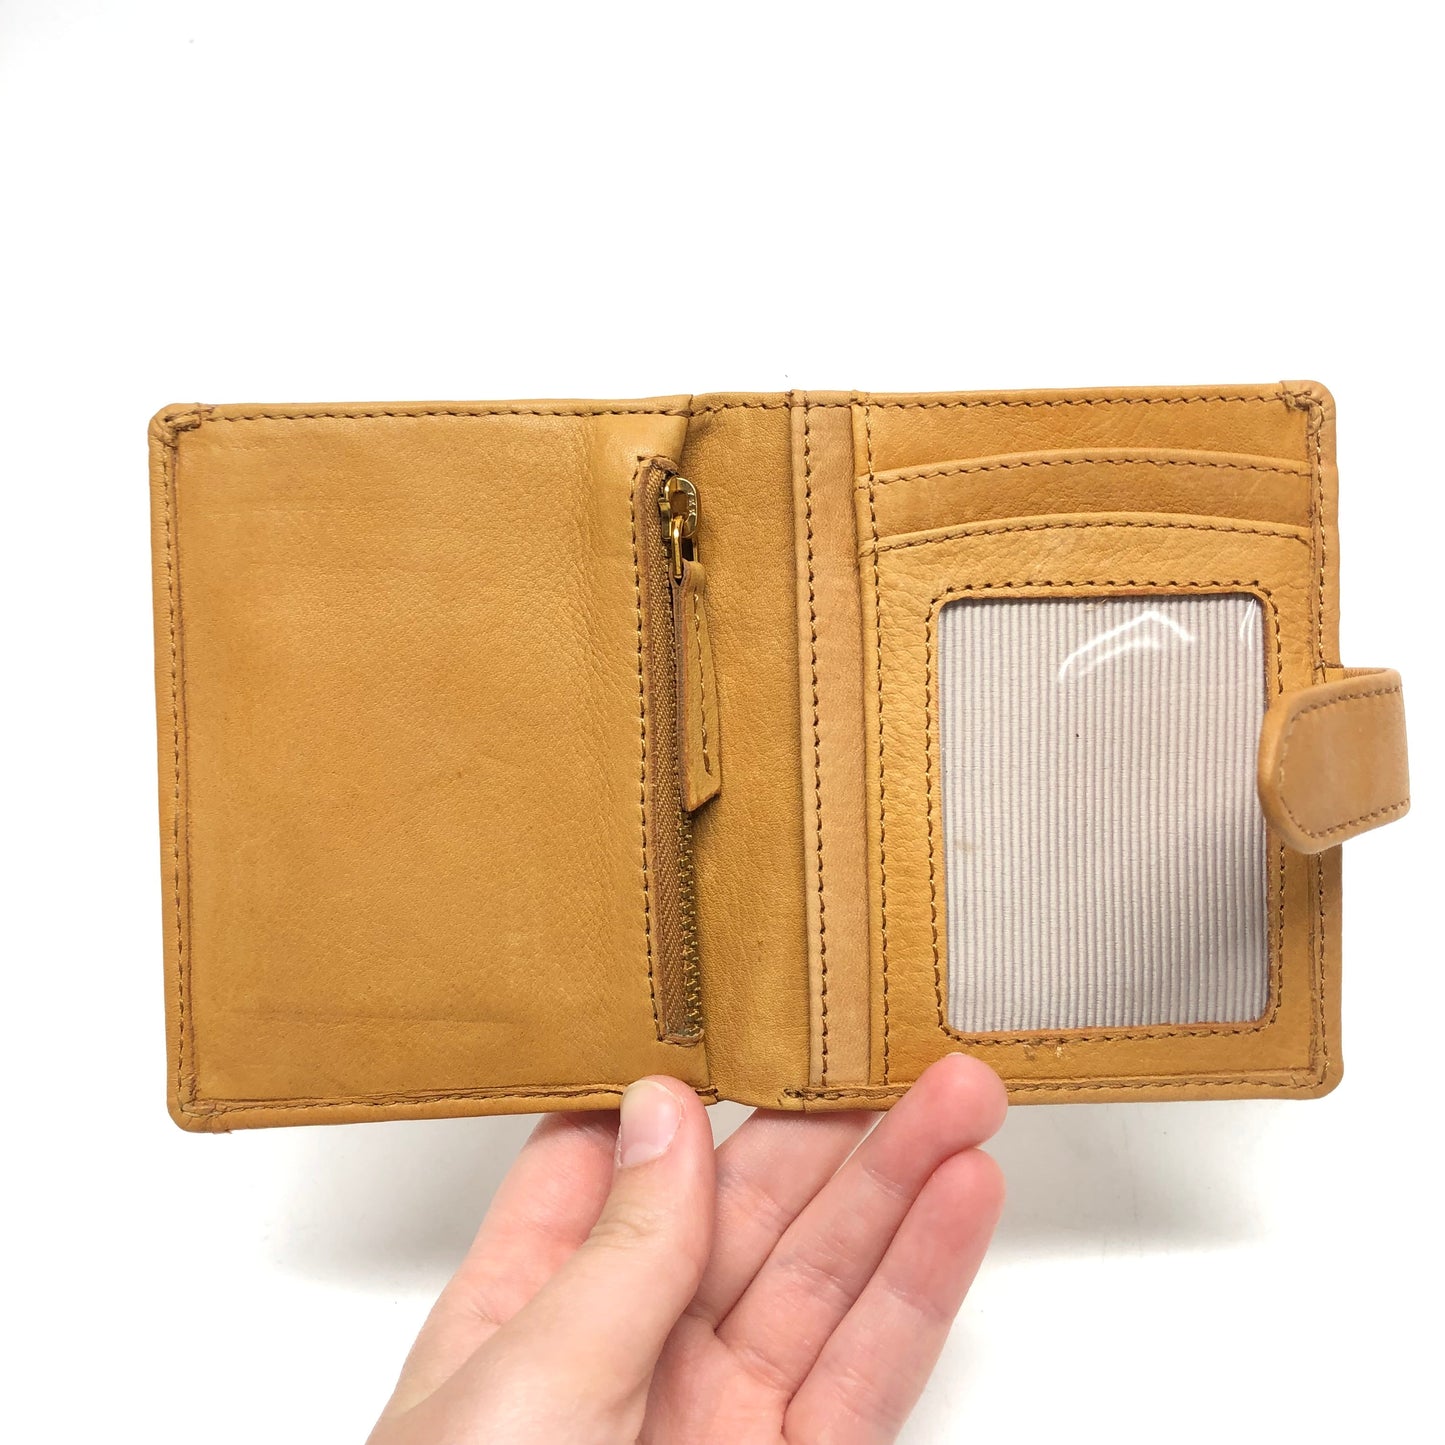 Wallet Leather Margot, Size Small